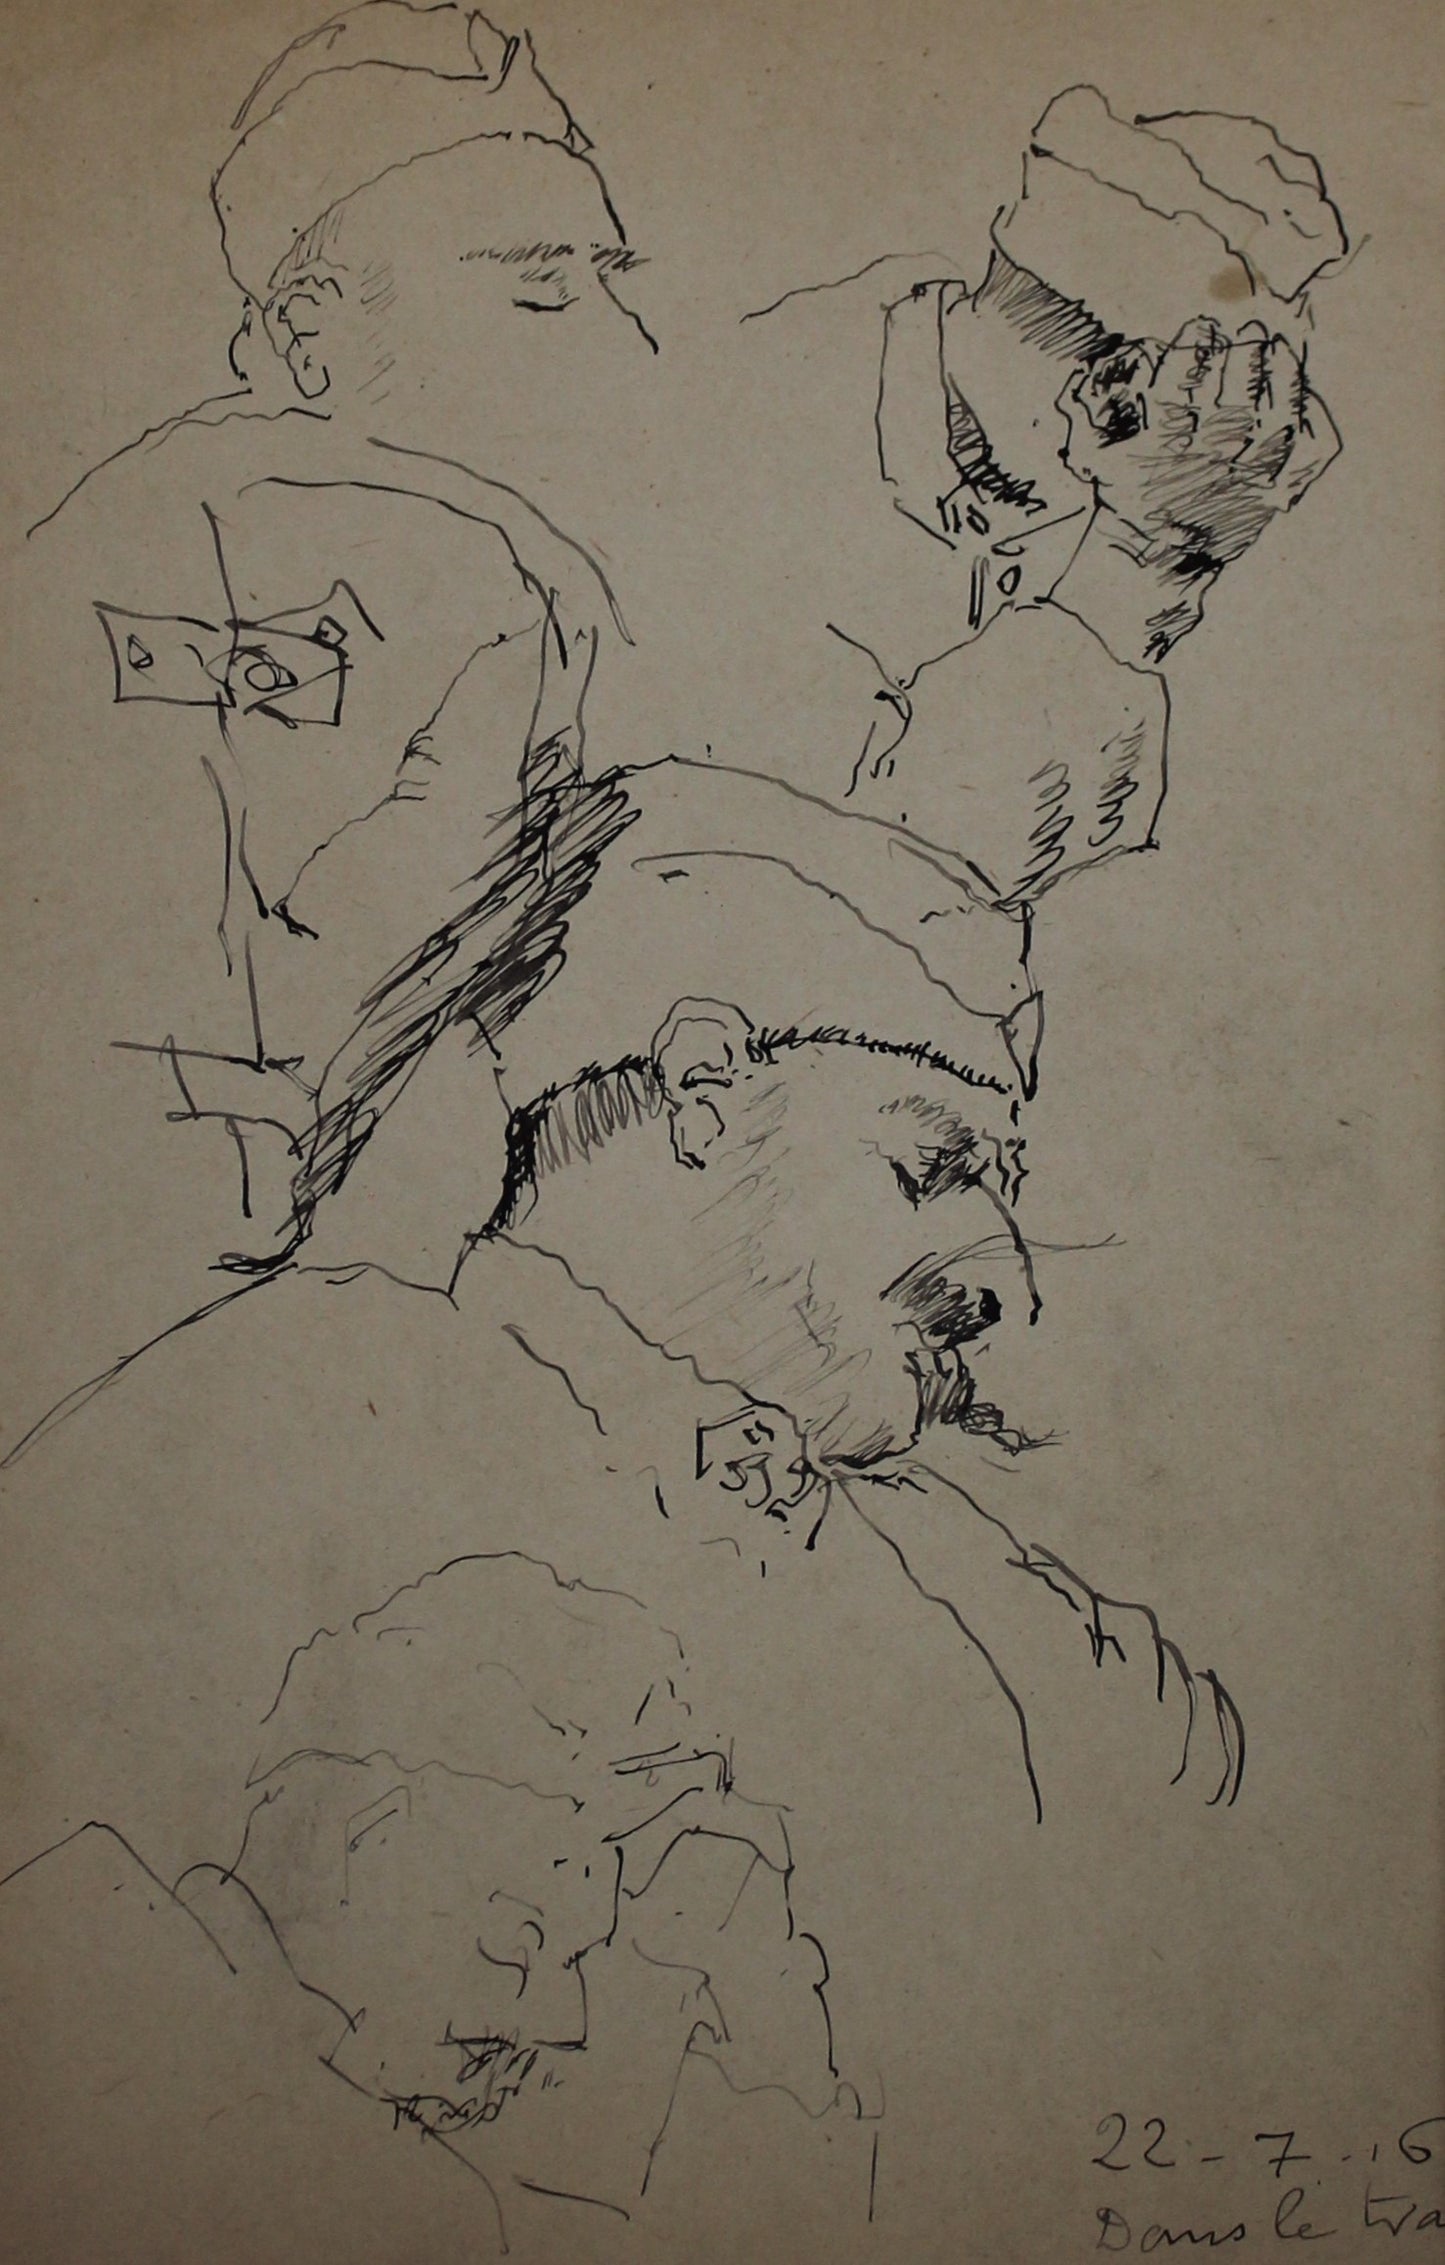 Drawing by Georges Pradelle